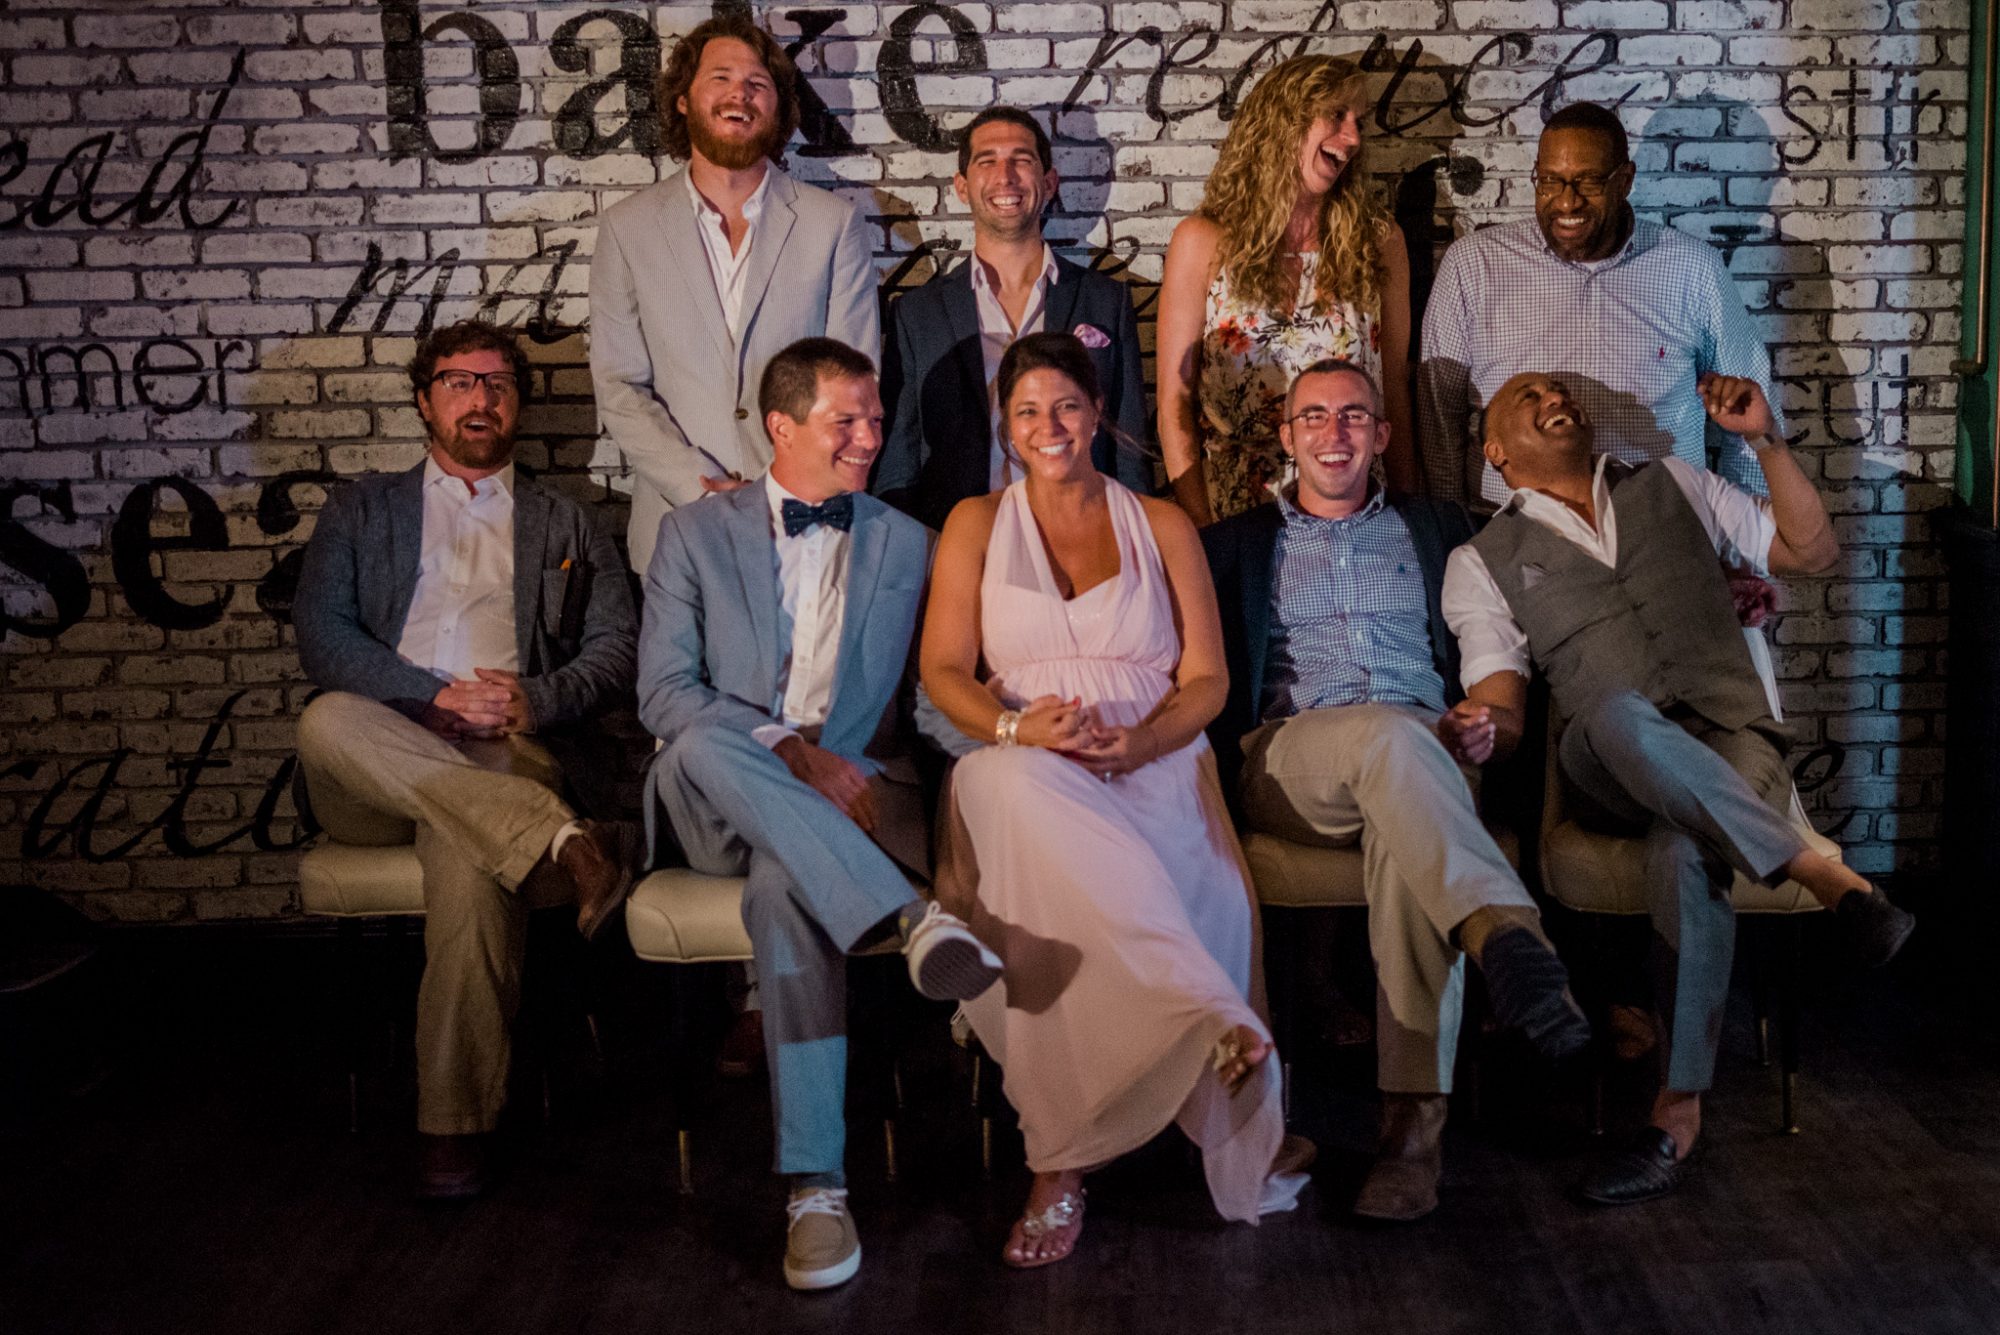 A group of people posing for a photo in front of a brick wall at a Key West Wedding.